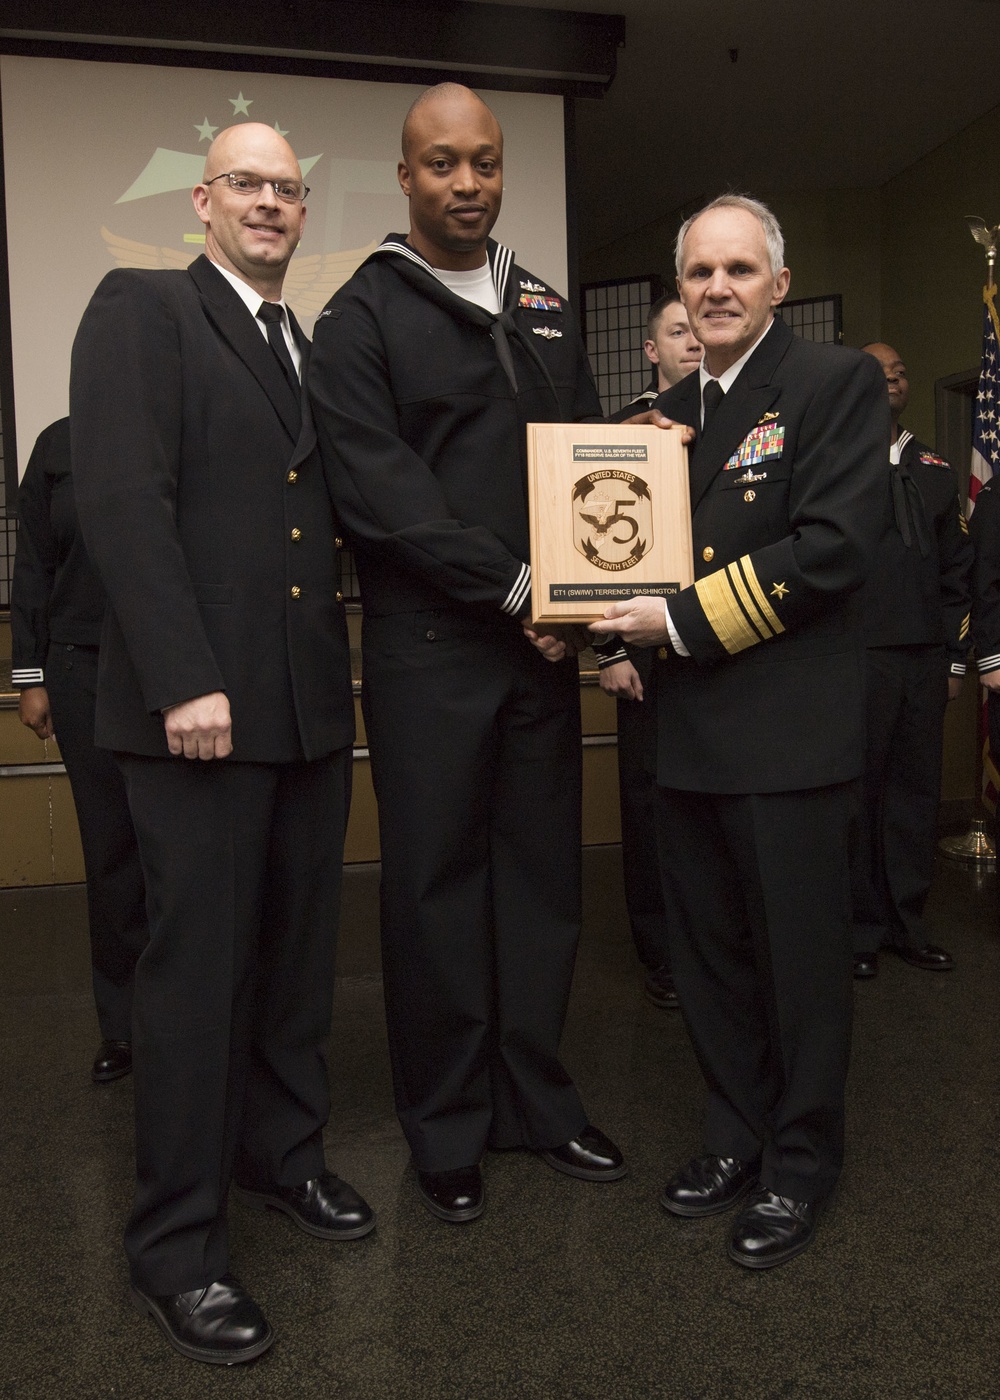 2018 7th Fleet Reserve Sailor of the Year, Electronic Technician 1st Class Terrence Washington